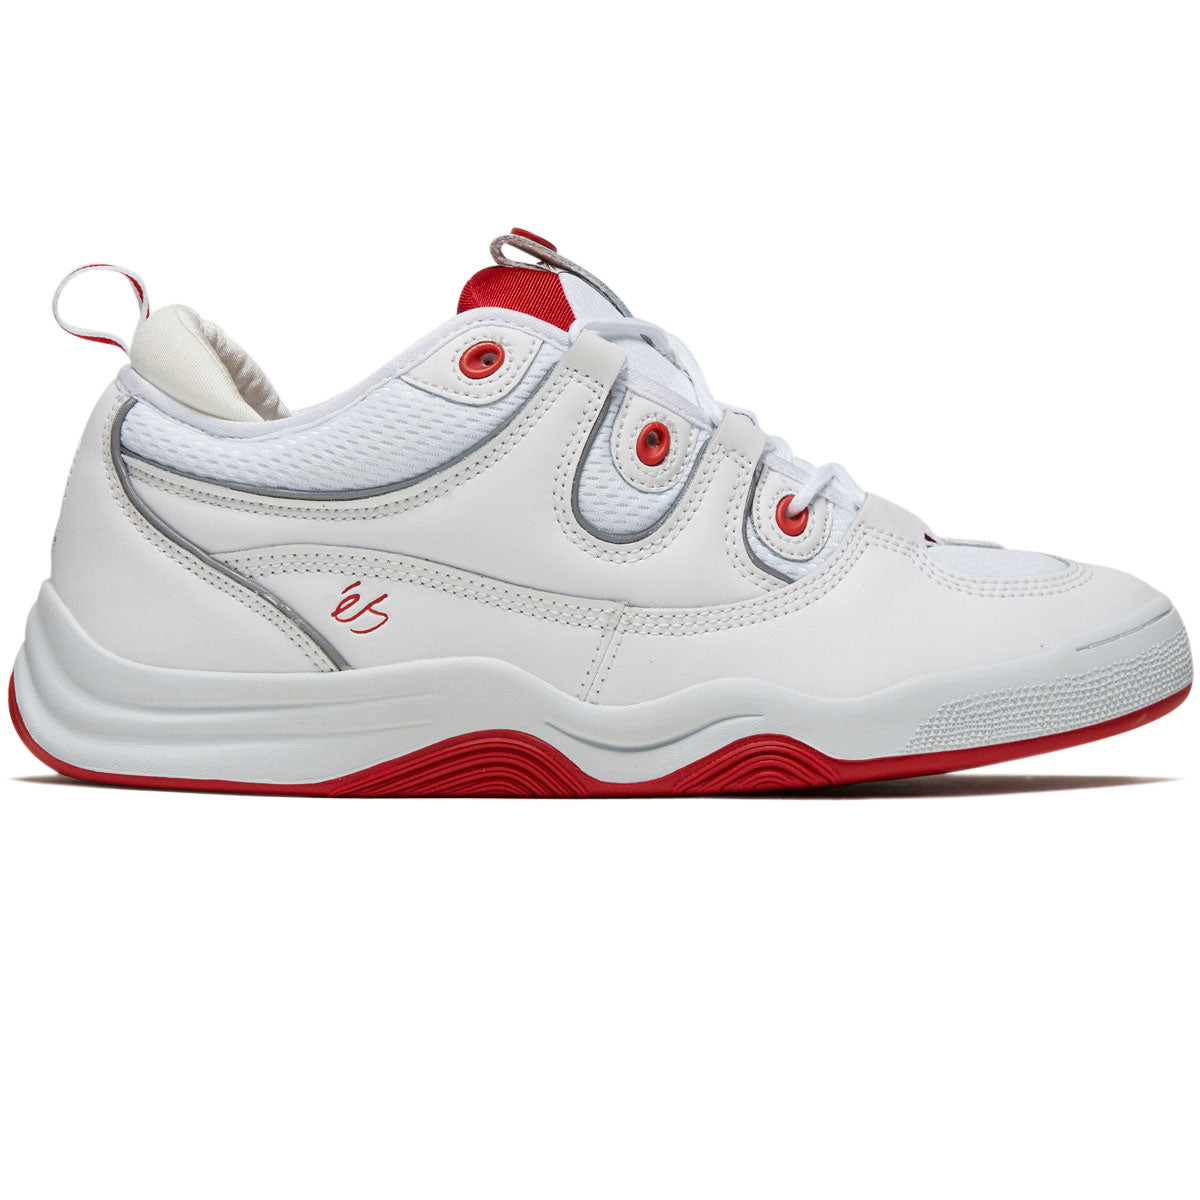 eS Two Nine 8 Skate Shop Day Shoes - White/Red image 1